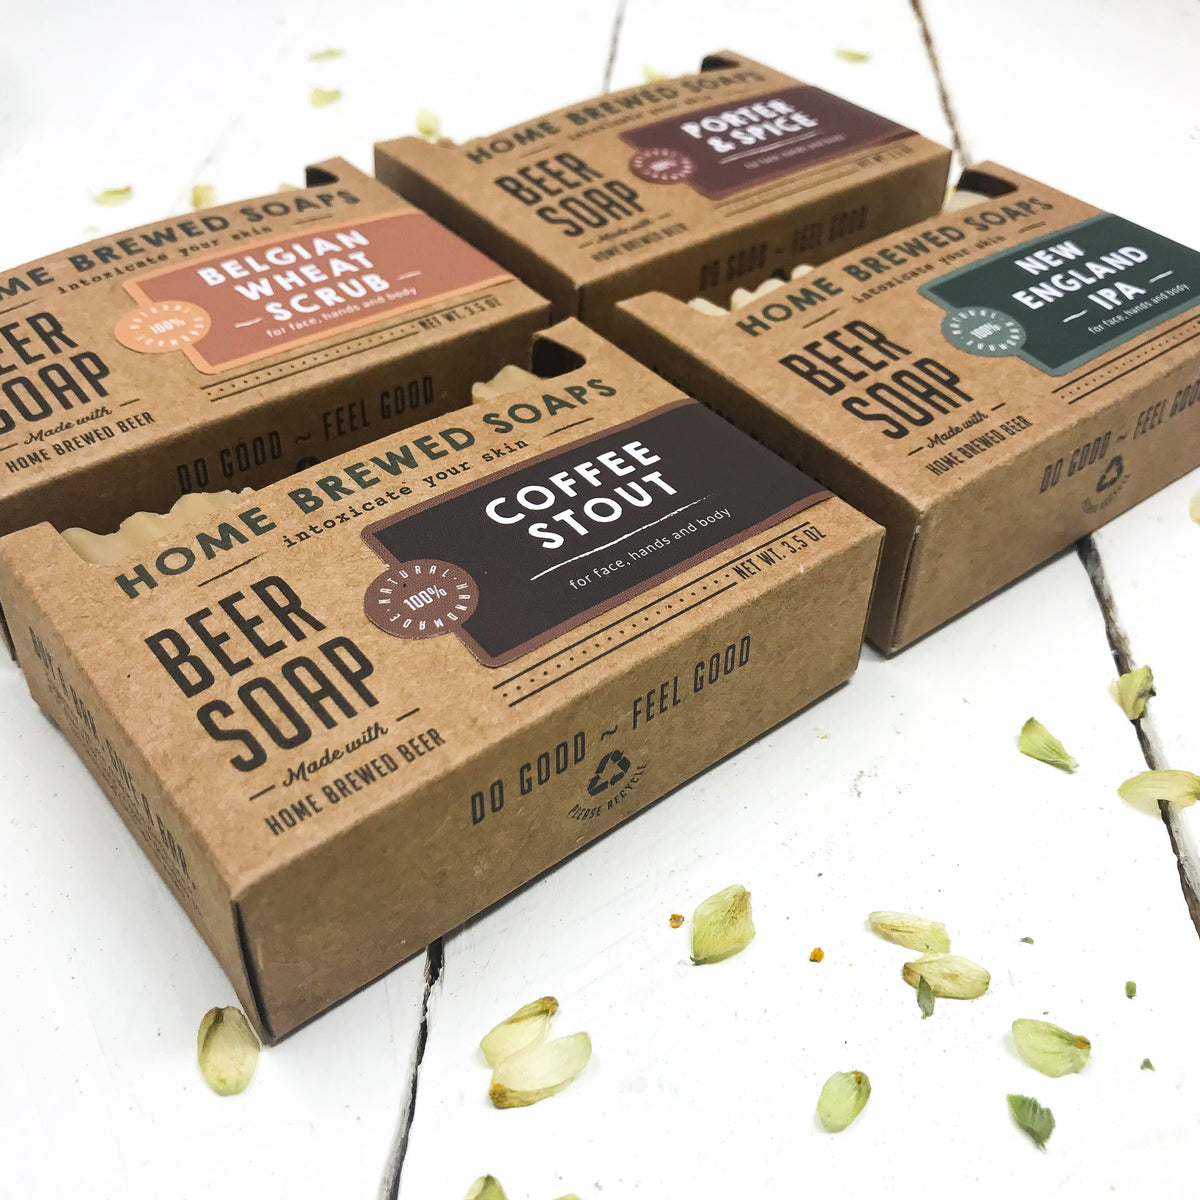 4 pack of Beer Soap - Beer Gifts by Home Brewed Soaps